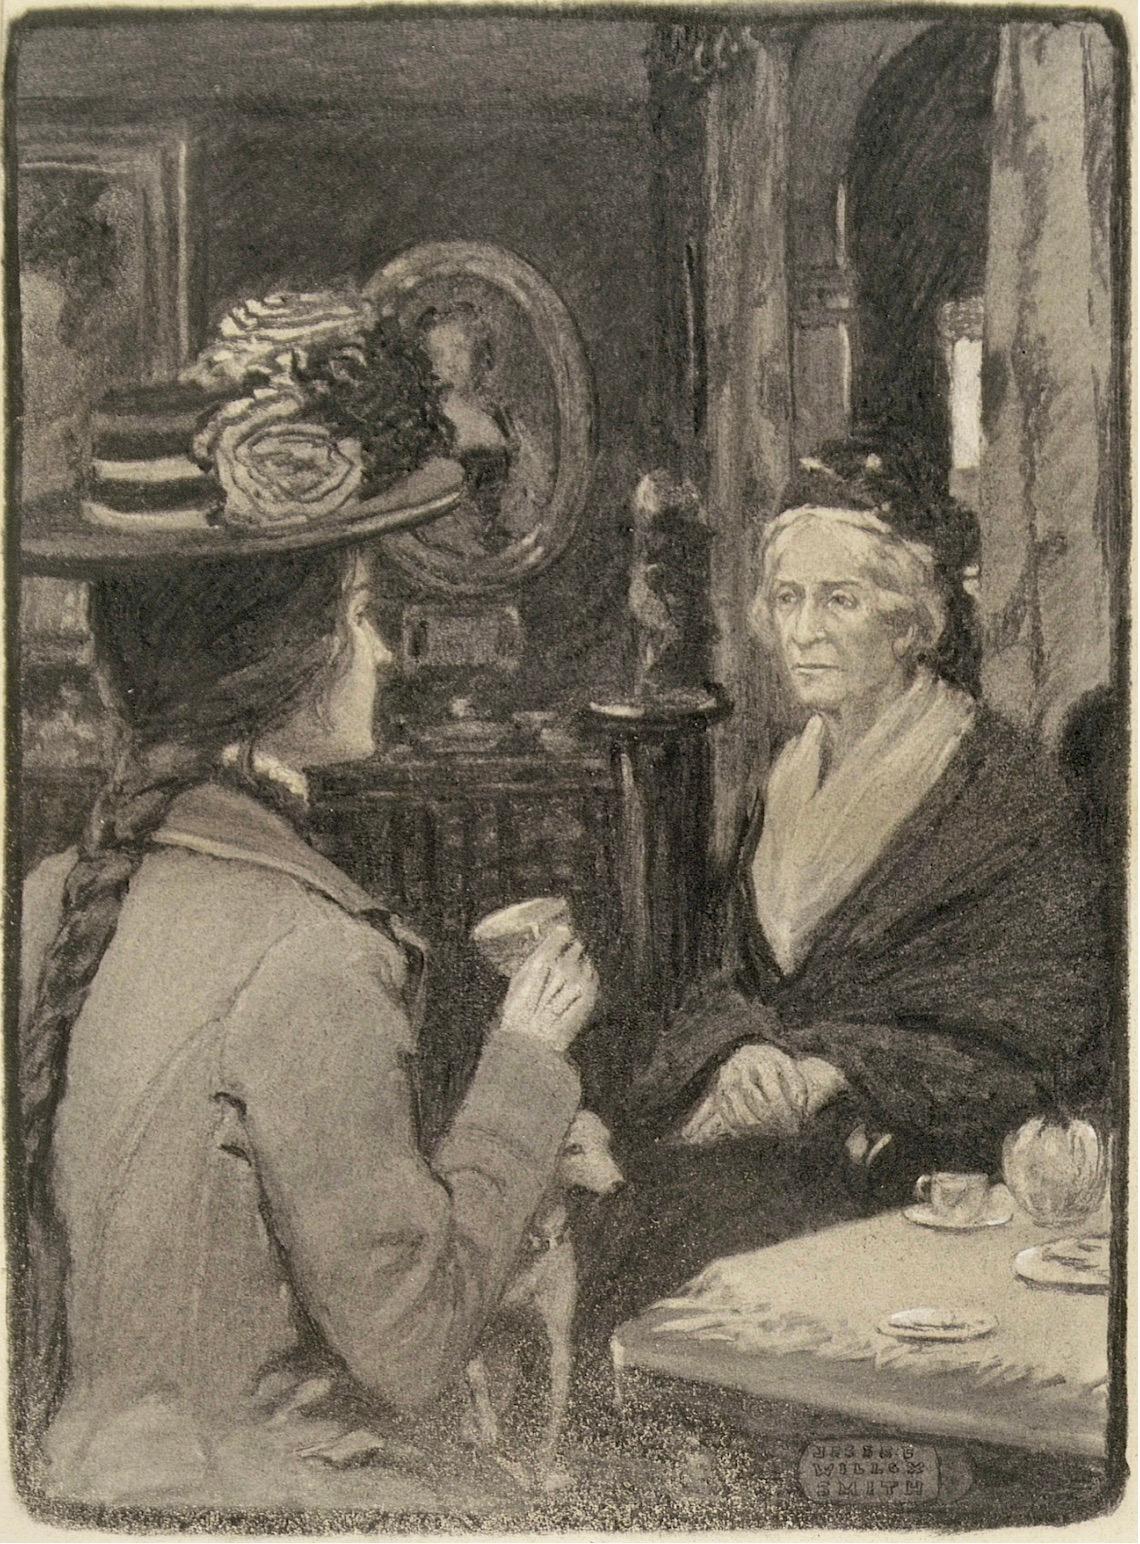 Two Women at Tea - Painting by Jessie Willcox Smith